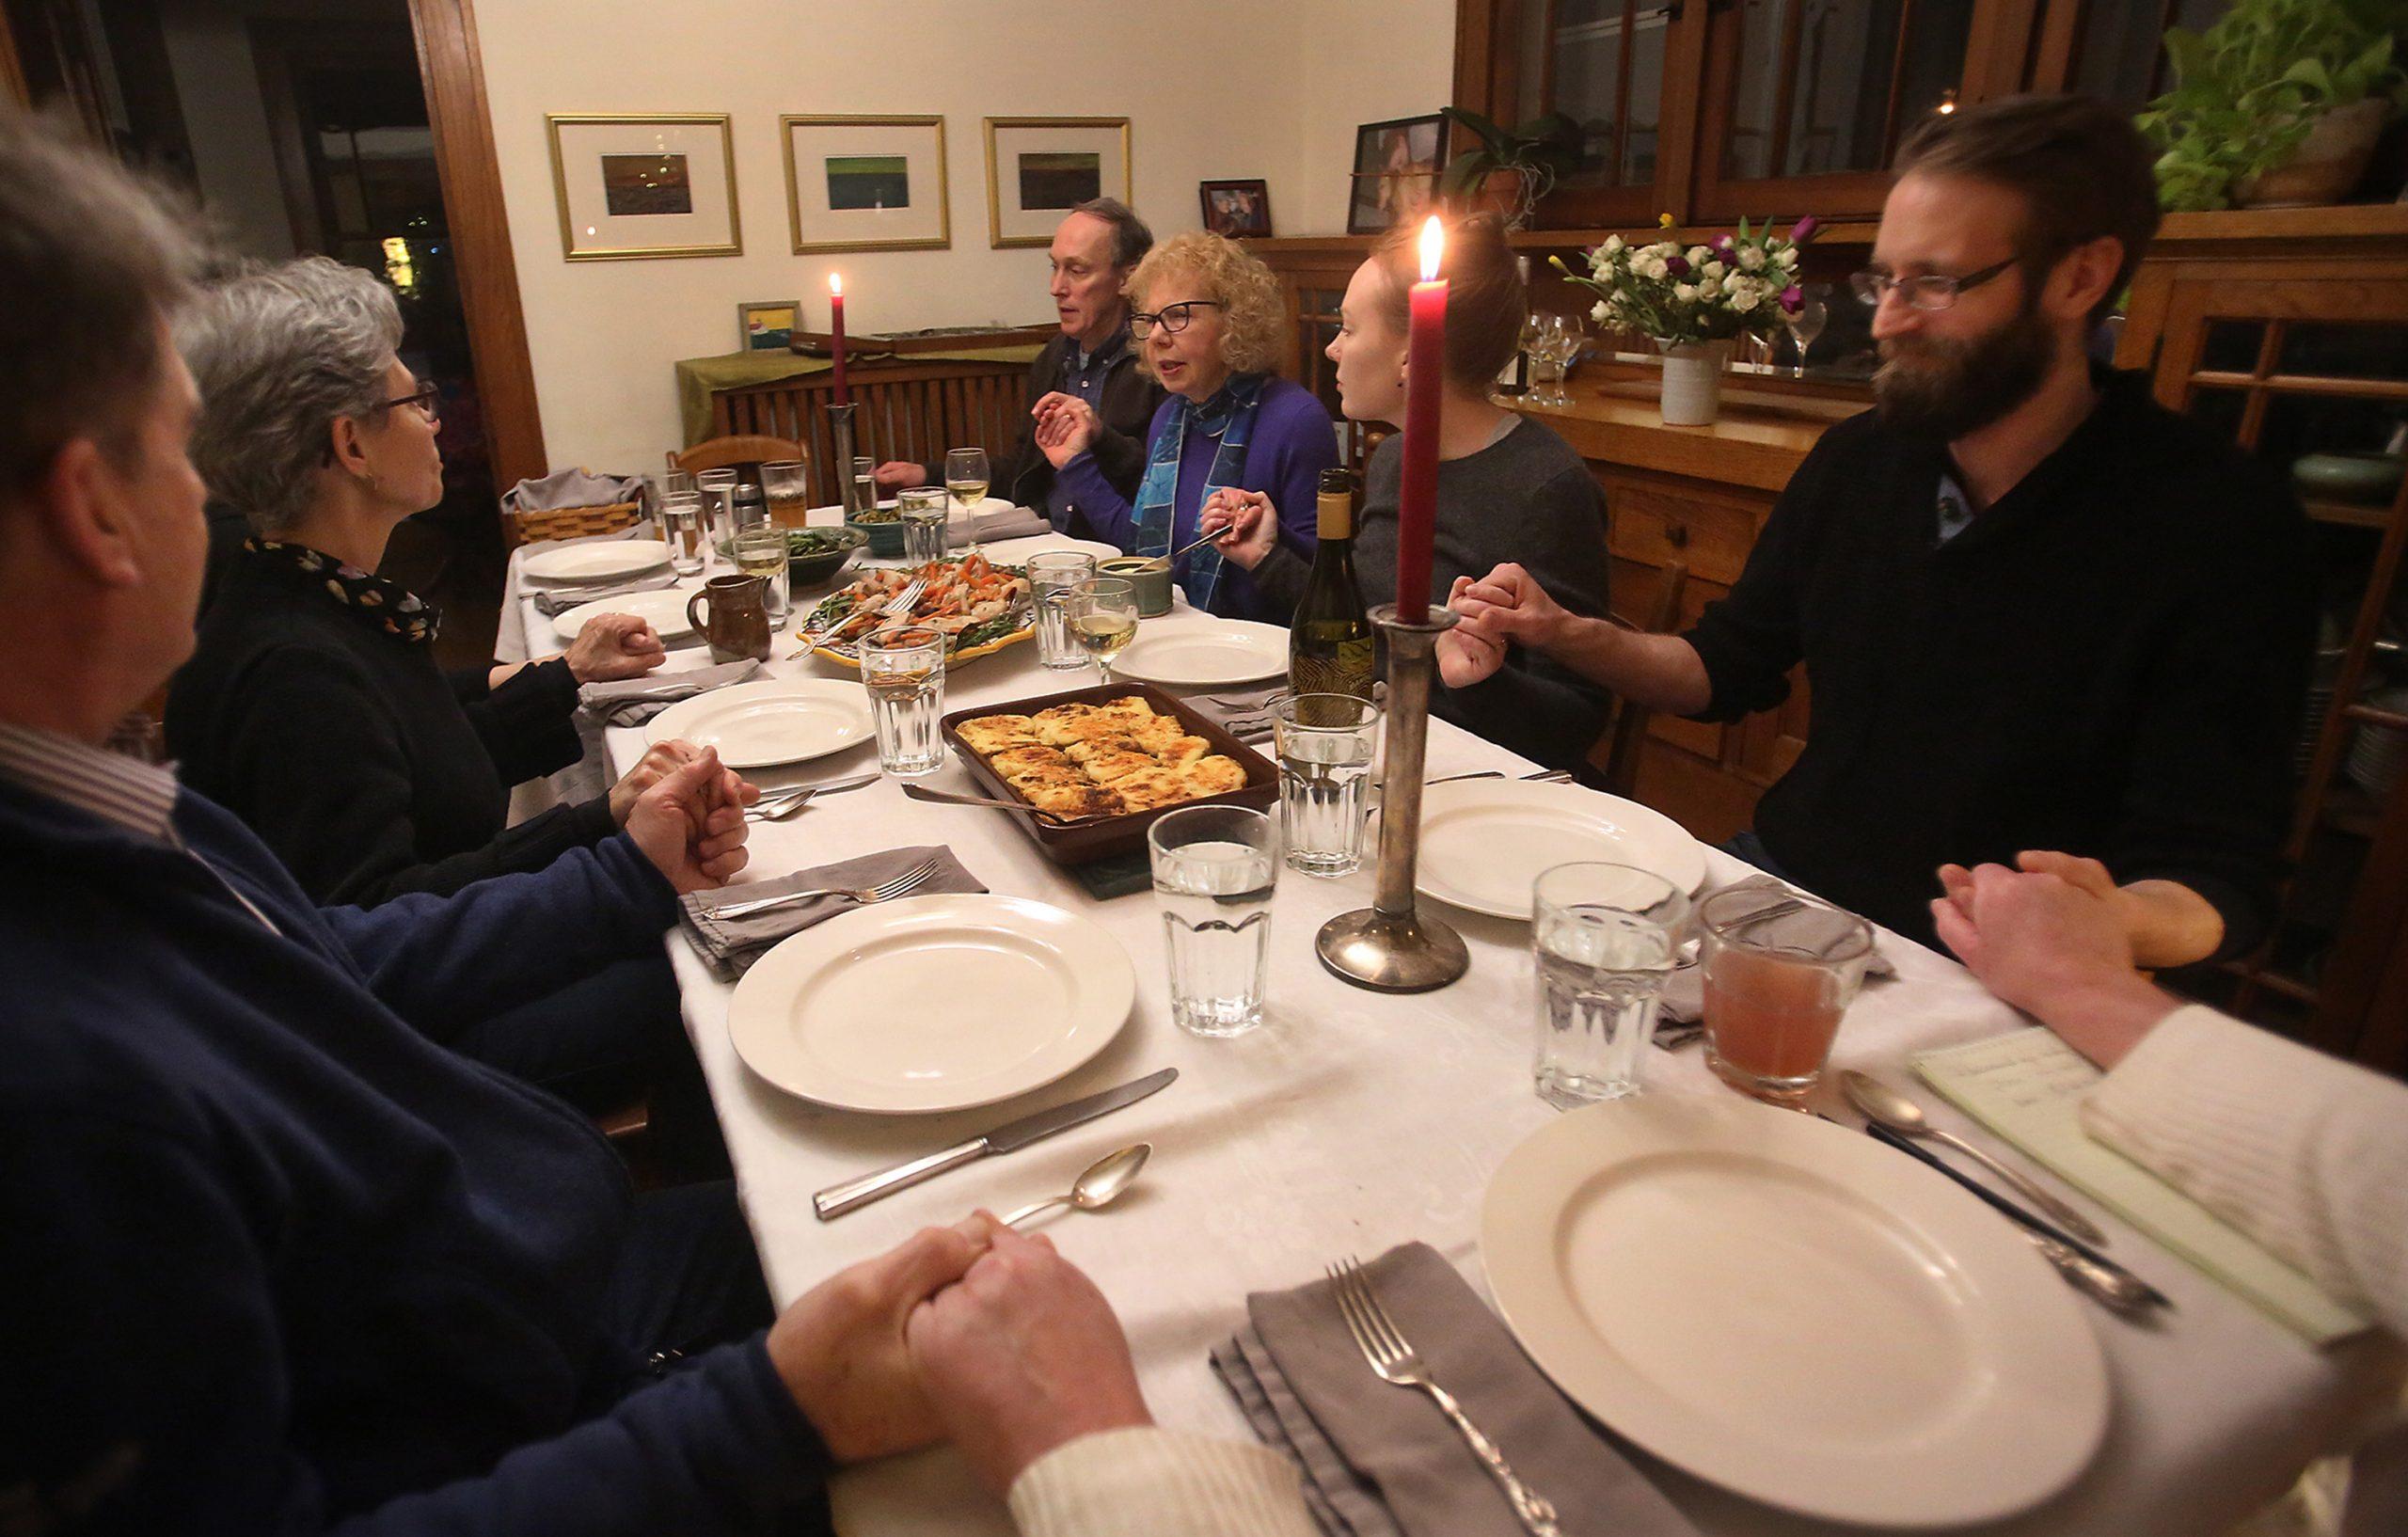 Ann Luce, back row, second from left, begins the dinner with prayer on Jan. 26, 2018 in Minneapolis, Minn. Two families, their children and occasionally their friends have been dining together weekly for about 30 years. (David Joles/Minneapolis Star Tribune/TNS)